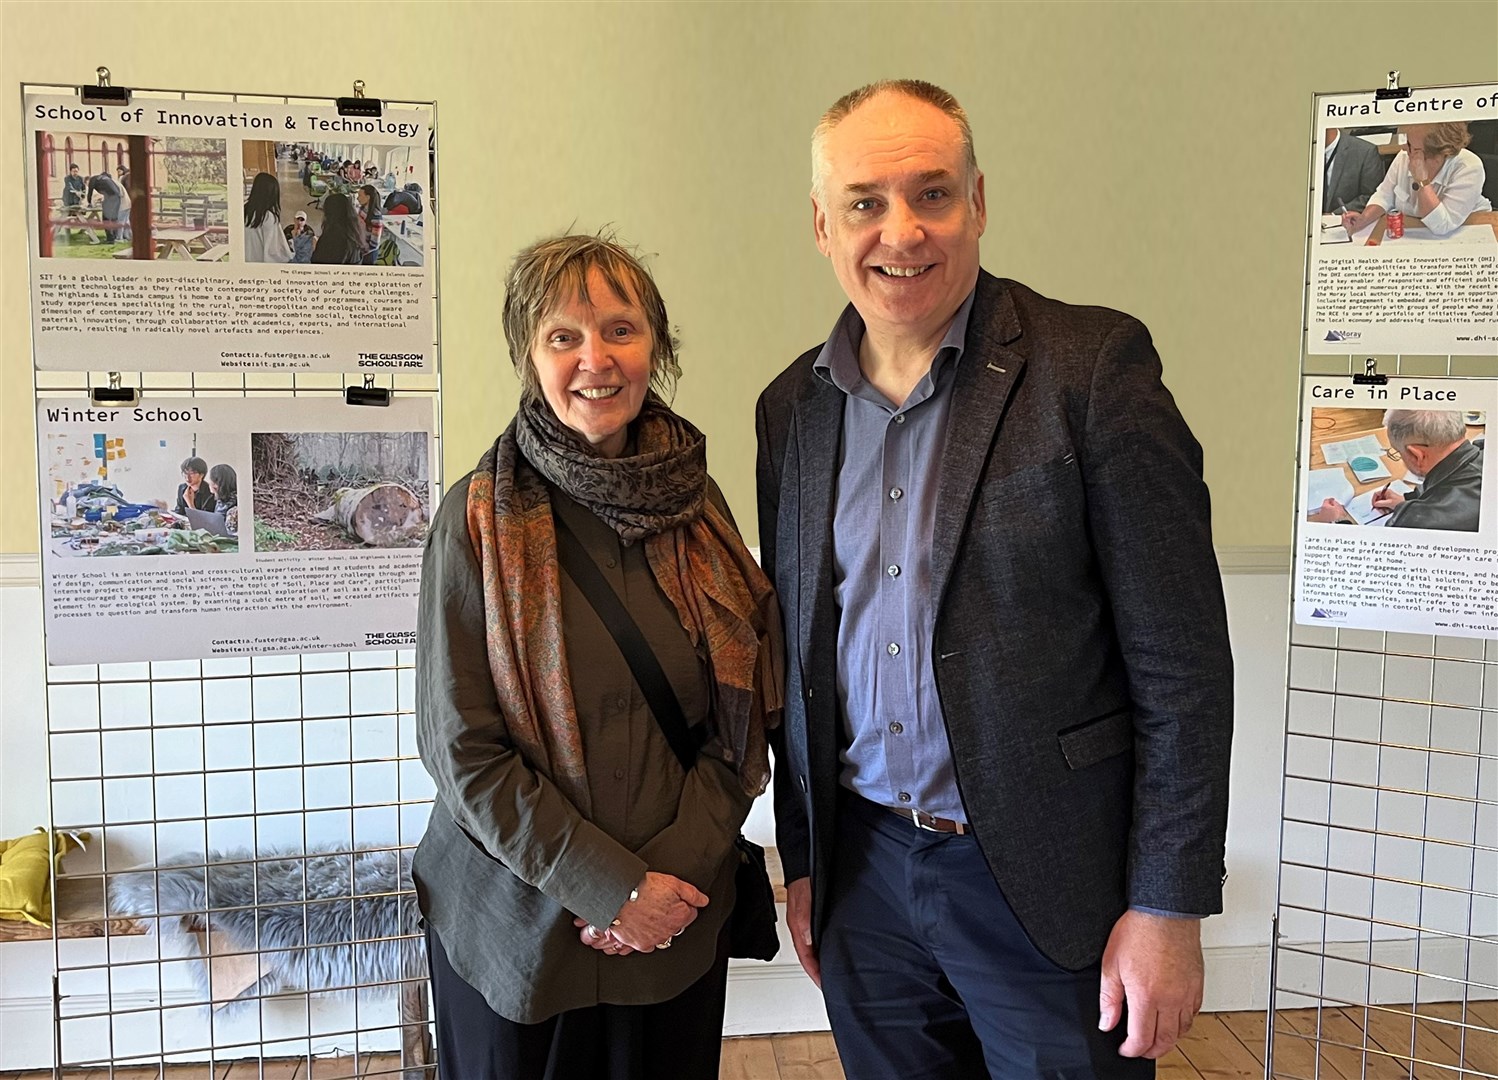 Richard Lochhead MSP with Prof Irene McAra-McWilliam, Director of Glasgow School of Art's Innovation and Technology campus at Forres.